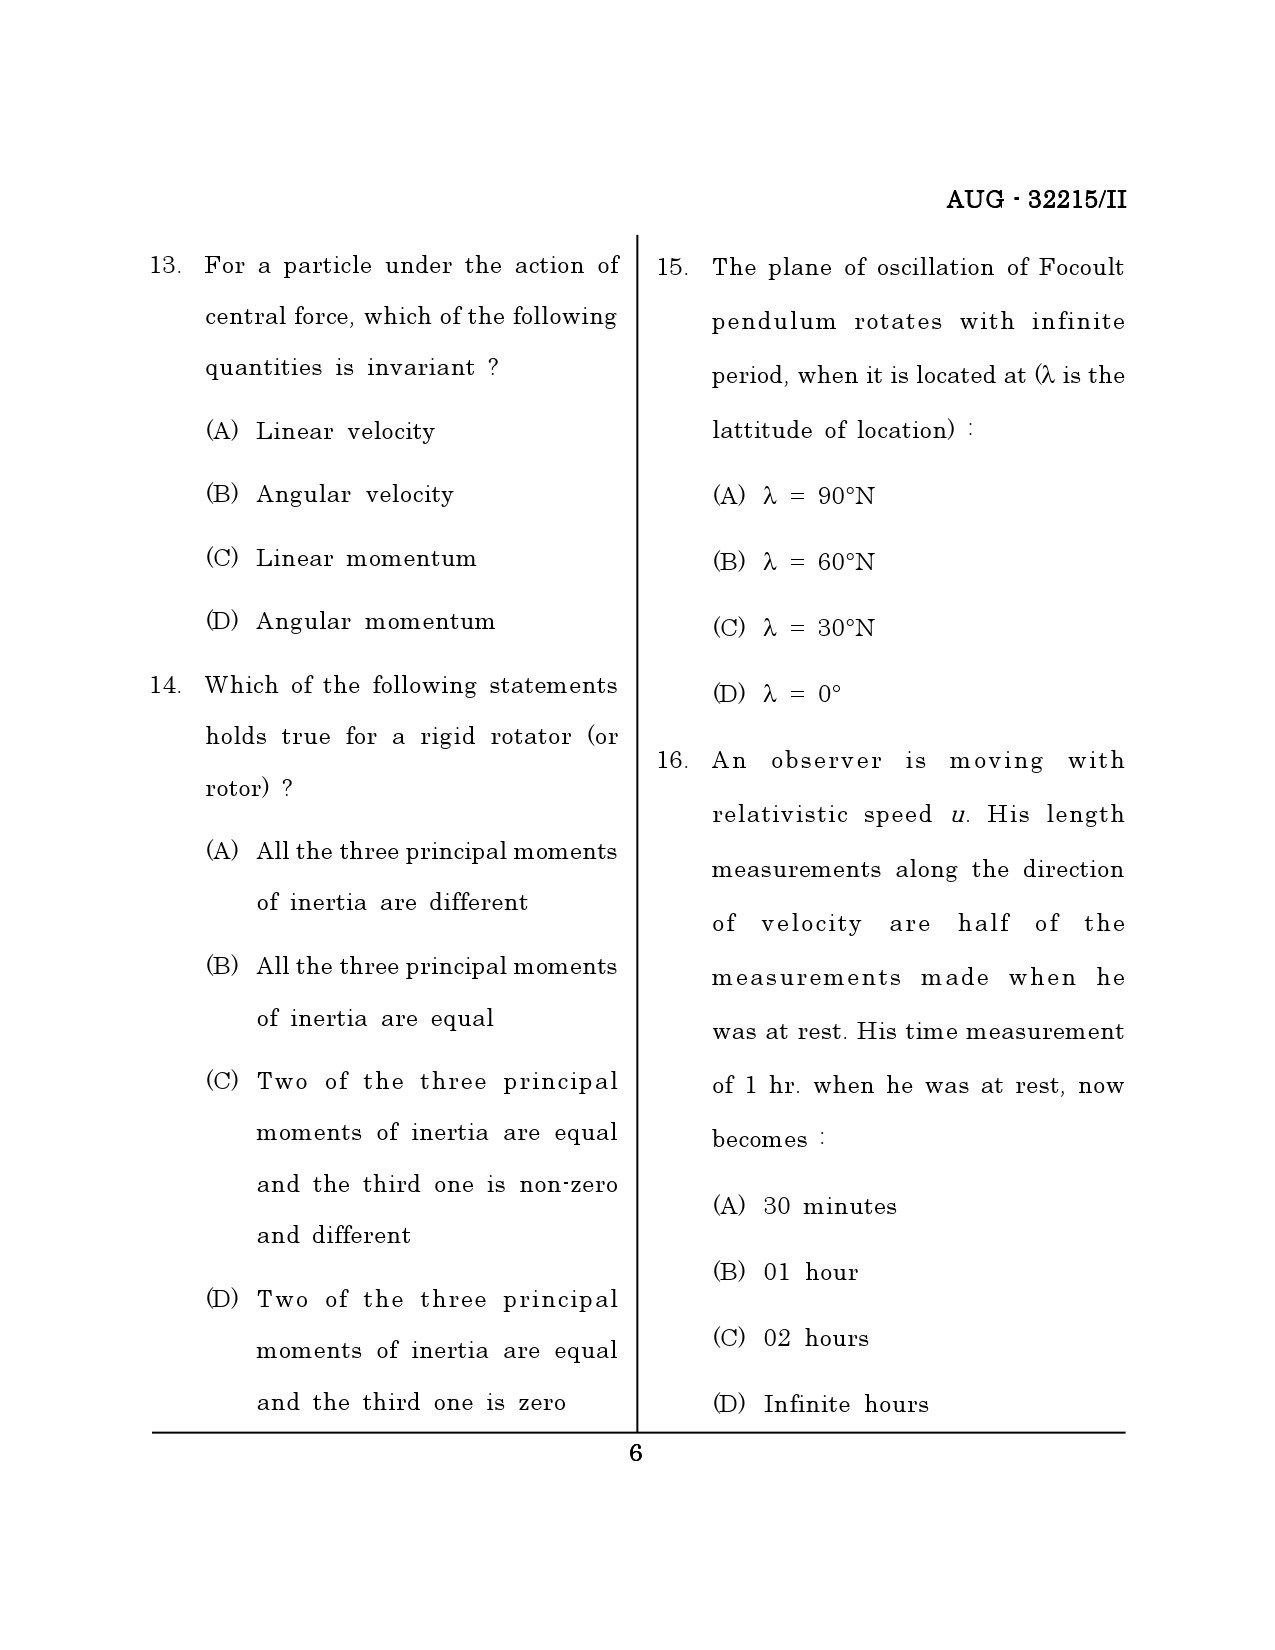 Maharashtra SET Physical Science Question Paper II August 2015 5